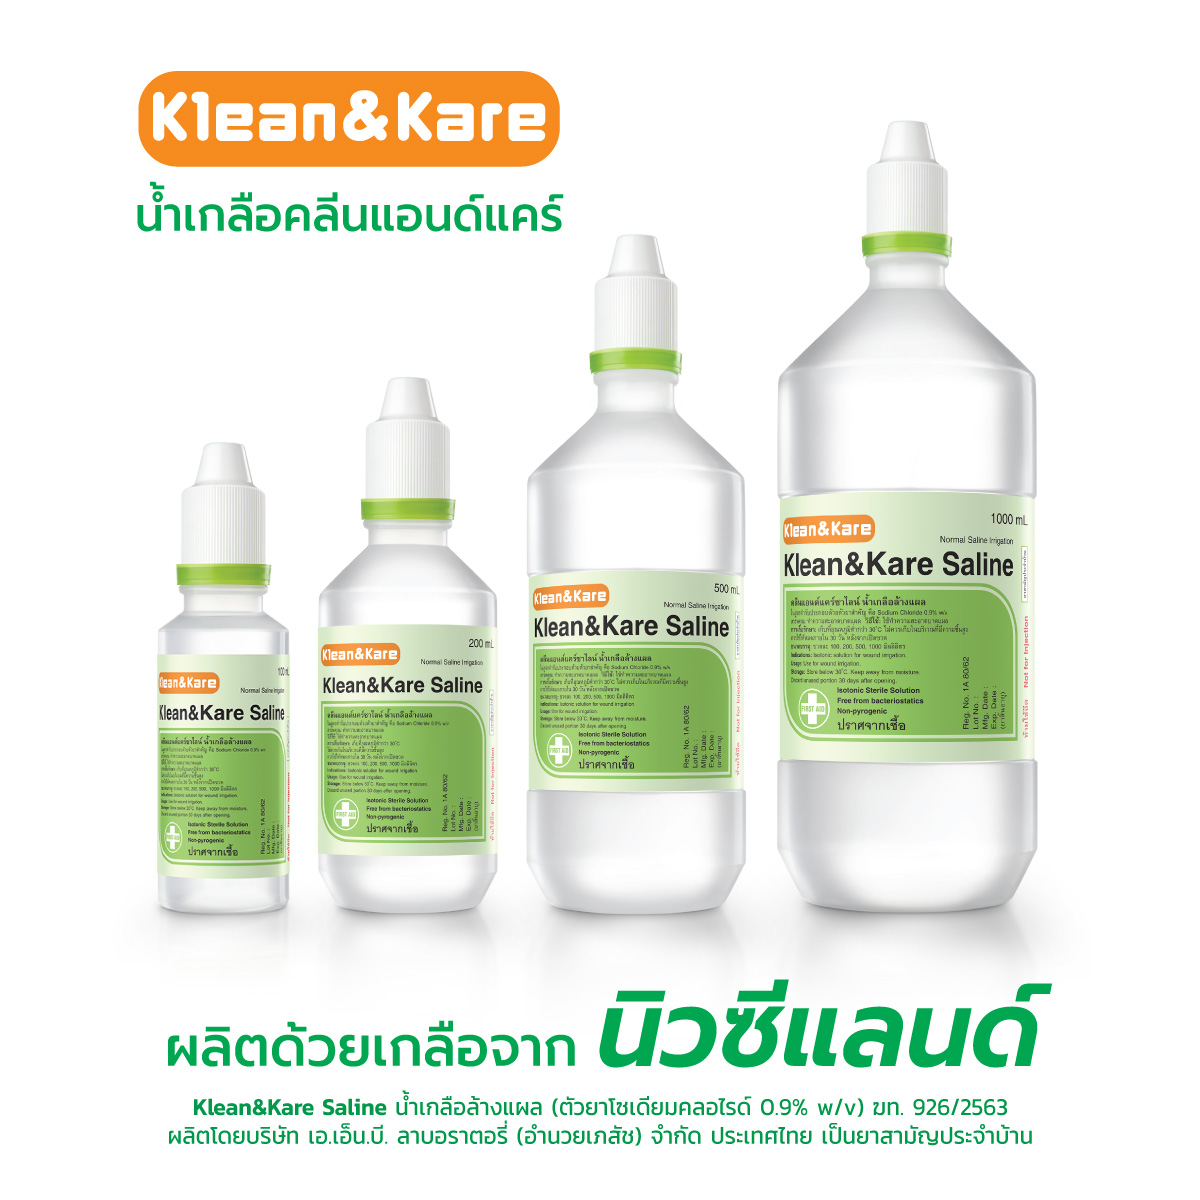 Physiological saline solution for baby's eyes and nose